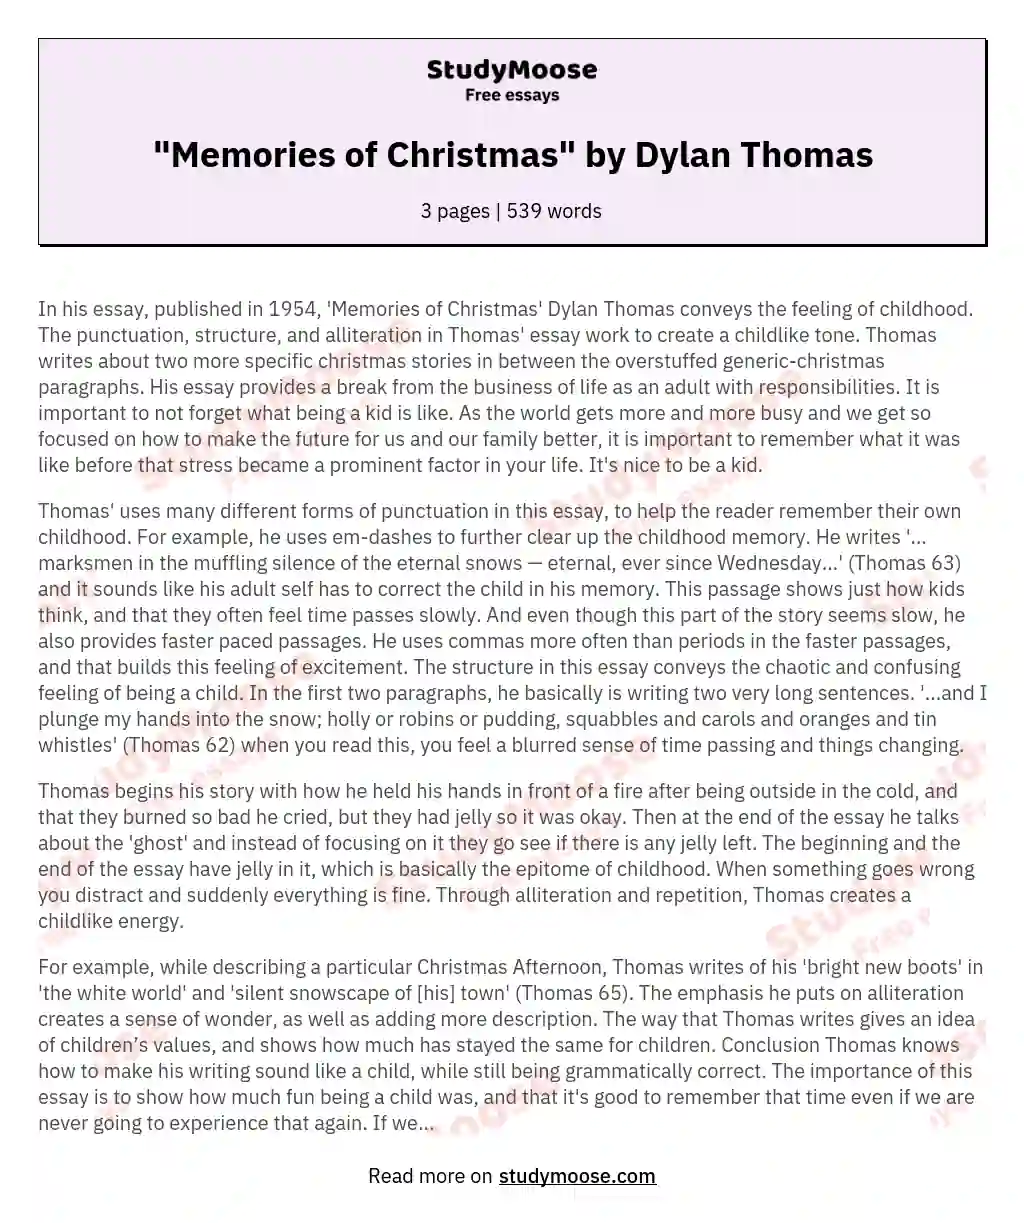 "Memories of Christmas" by Dylan Thomas essay